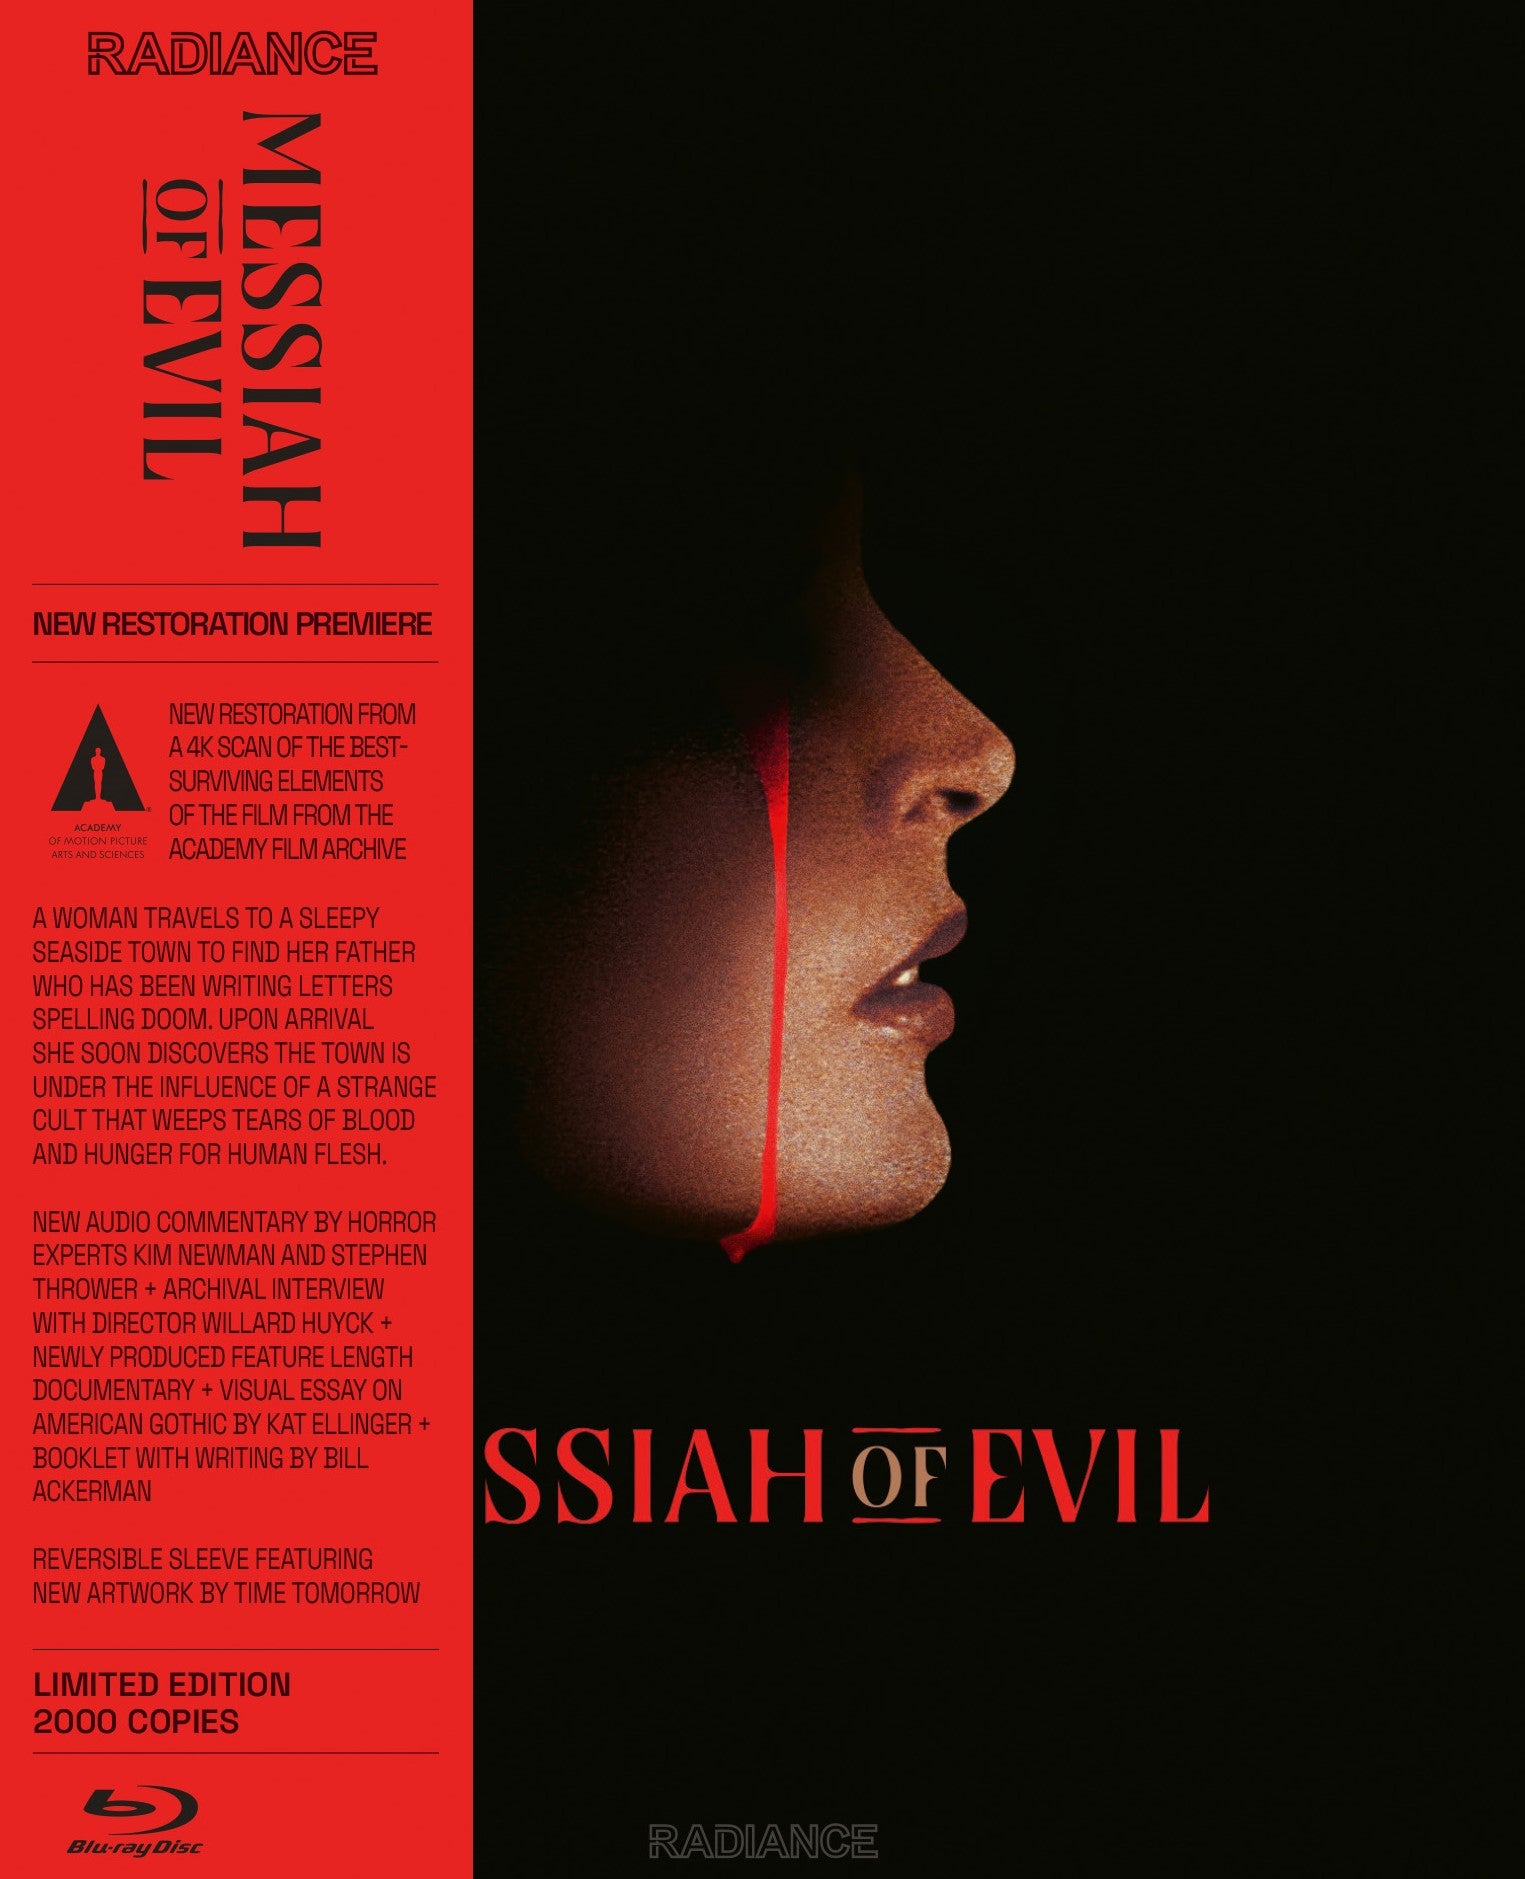 MESSIAH OF EVIL (SPECIAL EDITION) BLU-RAY